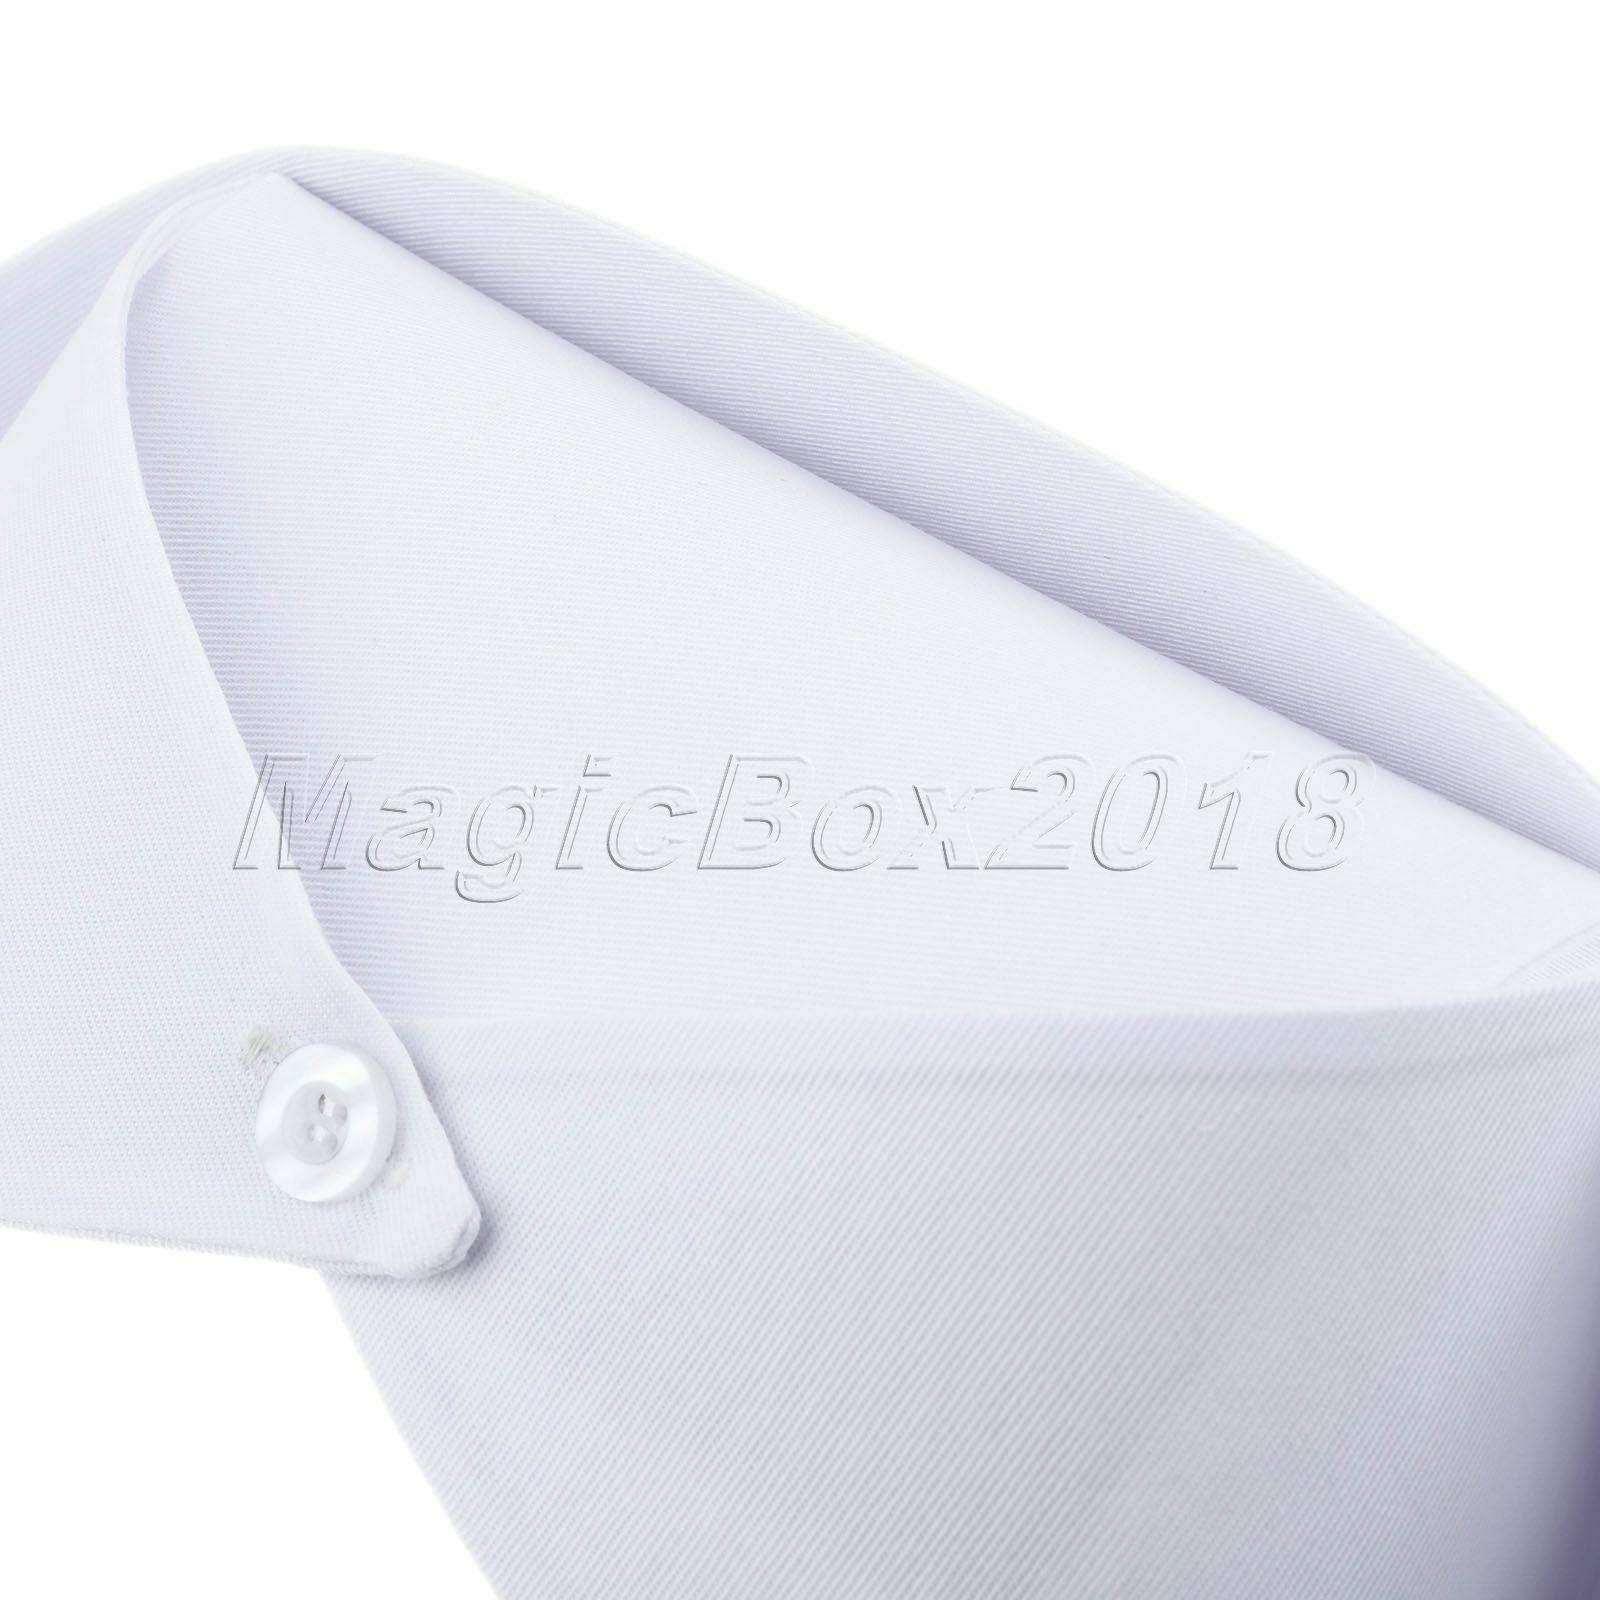 Cotton Medical Hats Thicken Surgical Caps Doctors Adjusted Hats White Nurse Cap